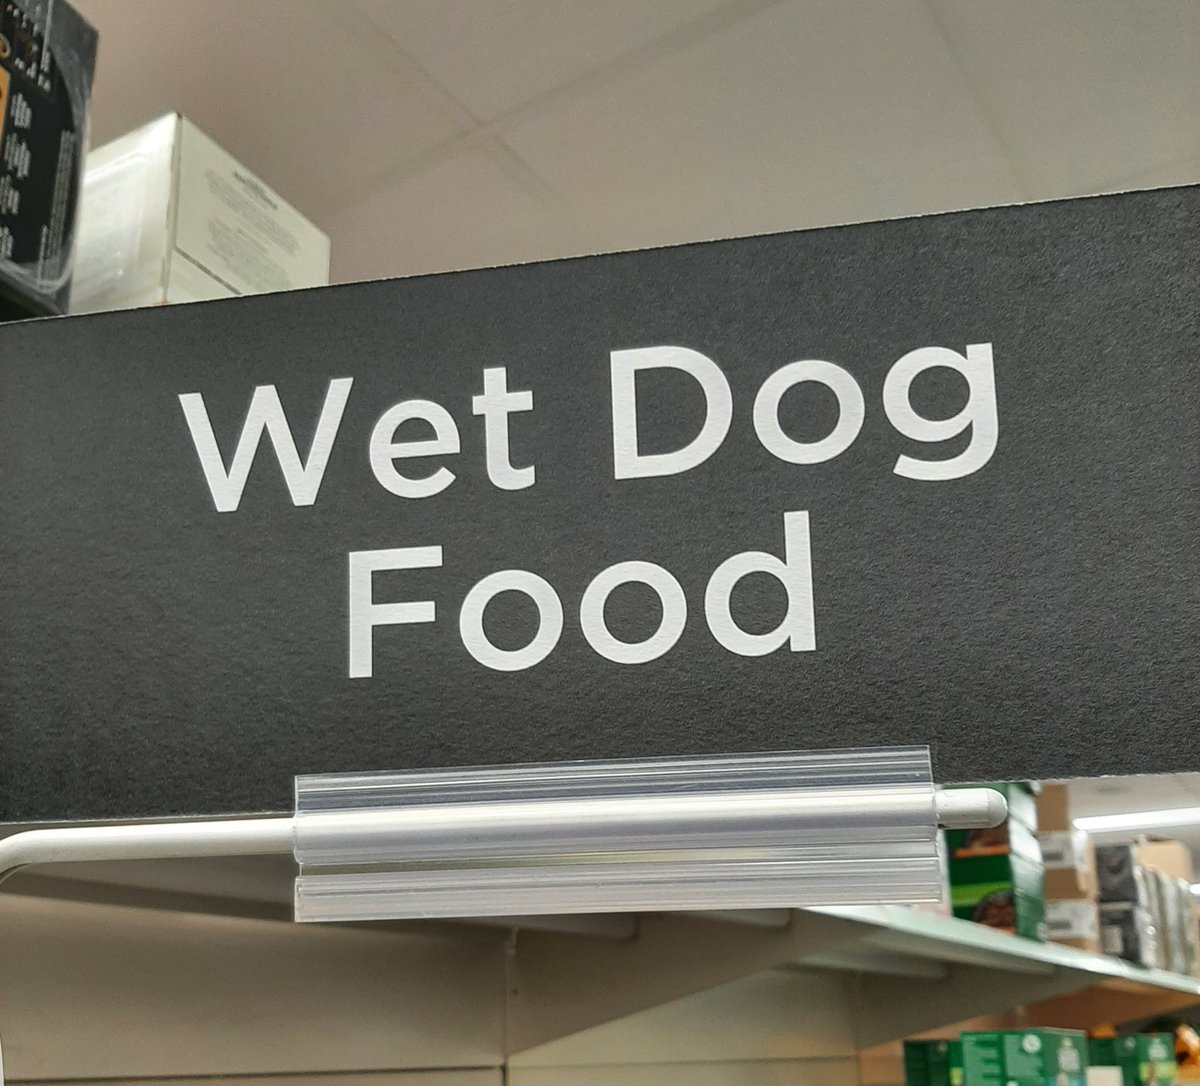 Presumably, the food for a dry dog is in a different aisle....